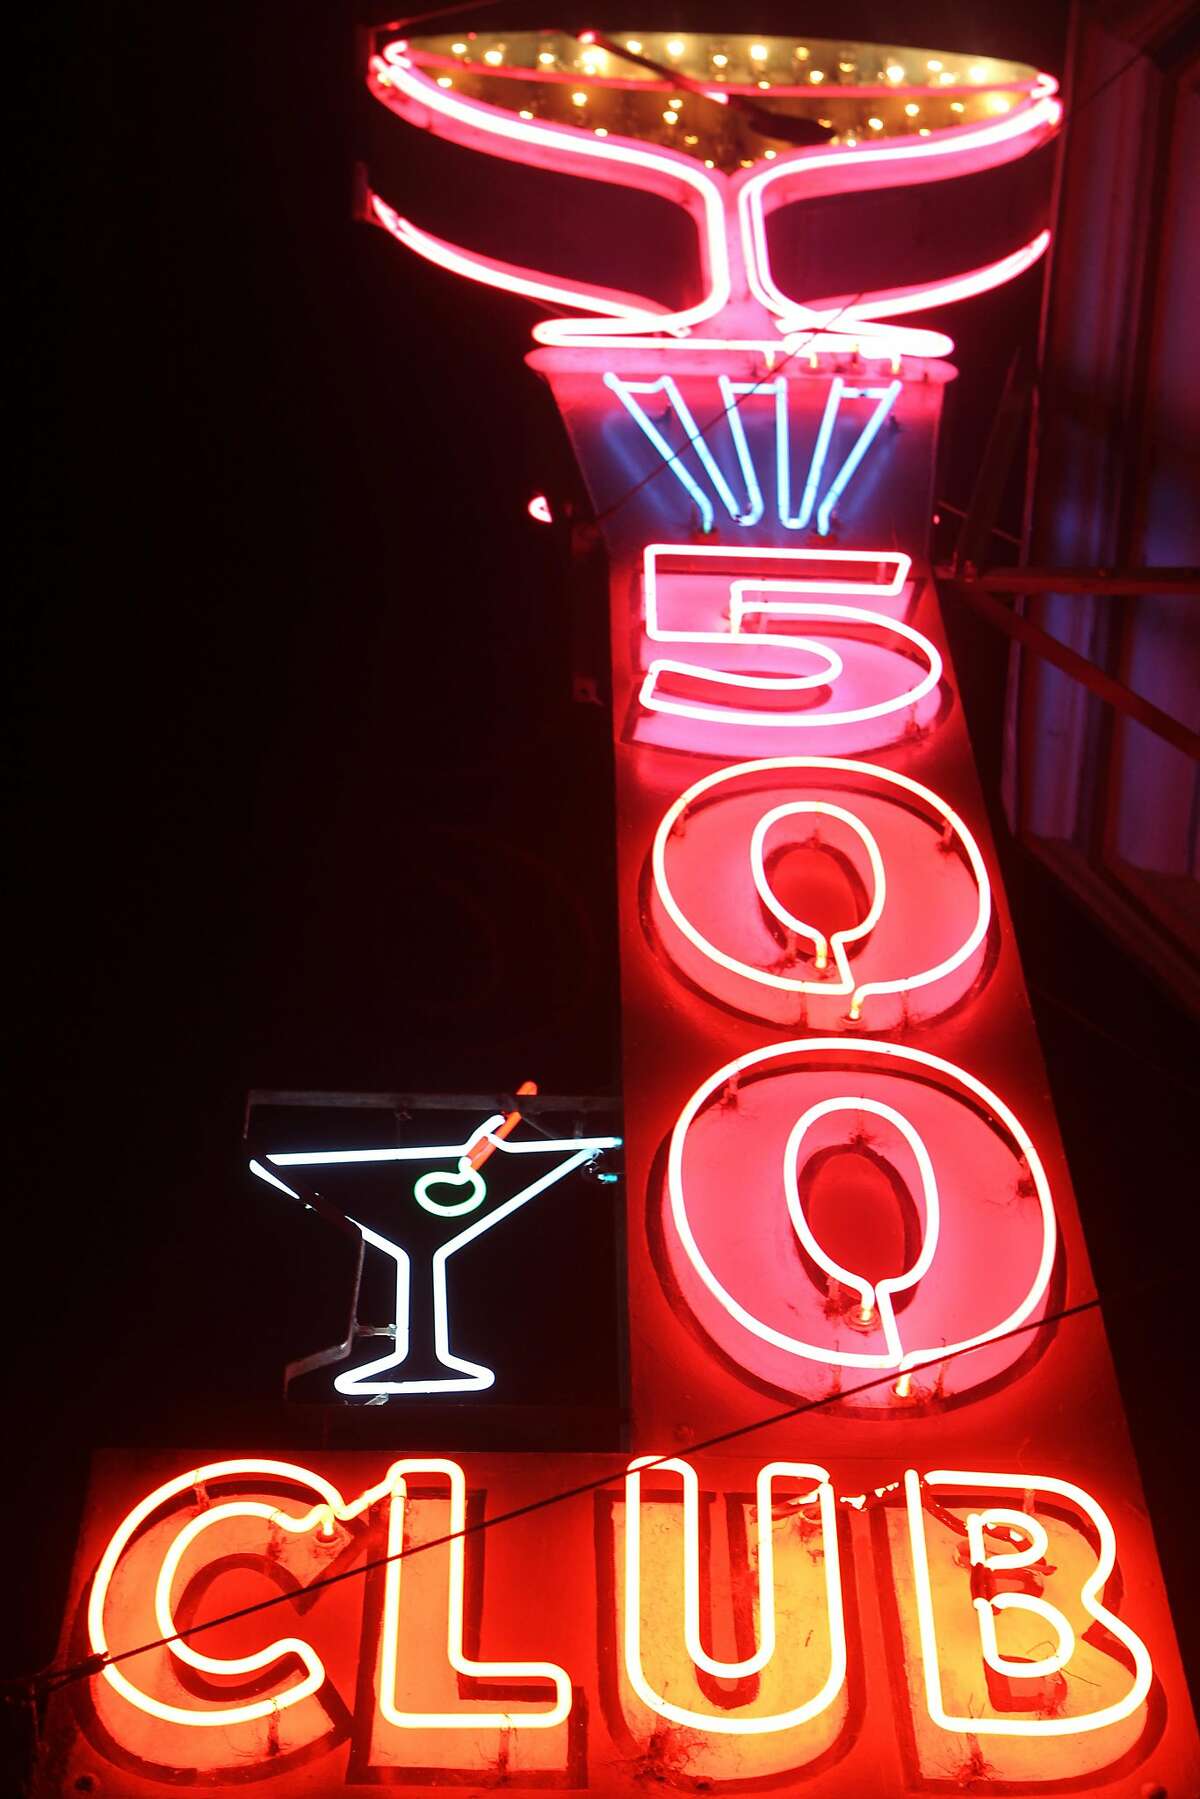 The big martini glass and the tall 500 Club sign attracts people passing by in the mission in San Francisco, Calif., on Thursday December 4, 2014.